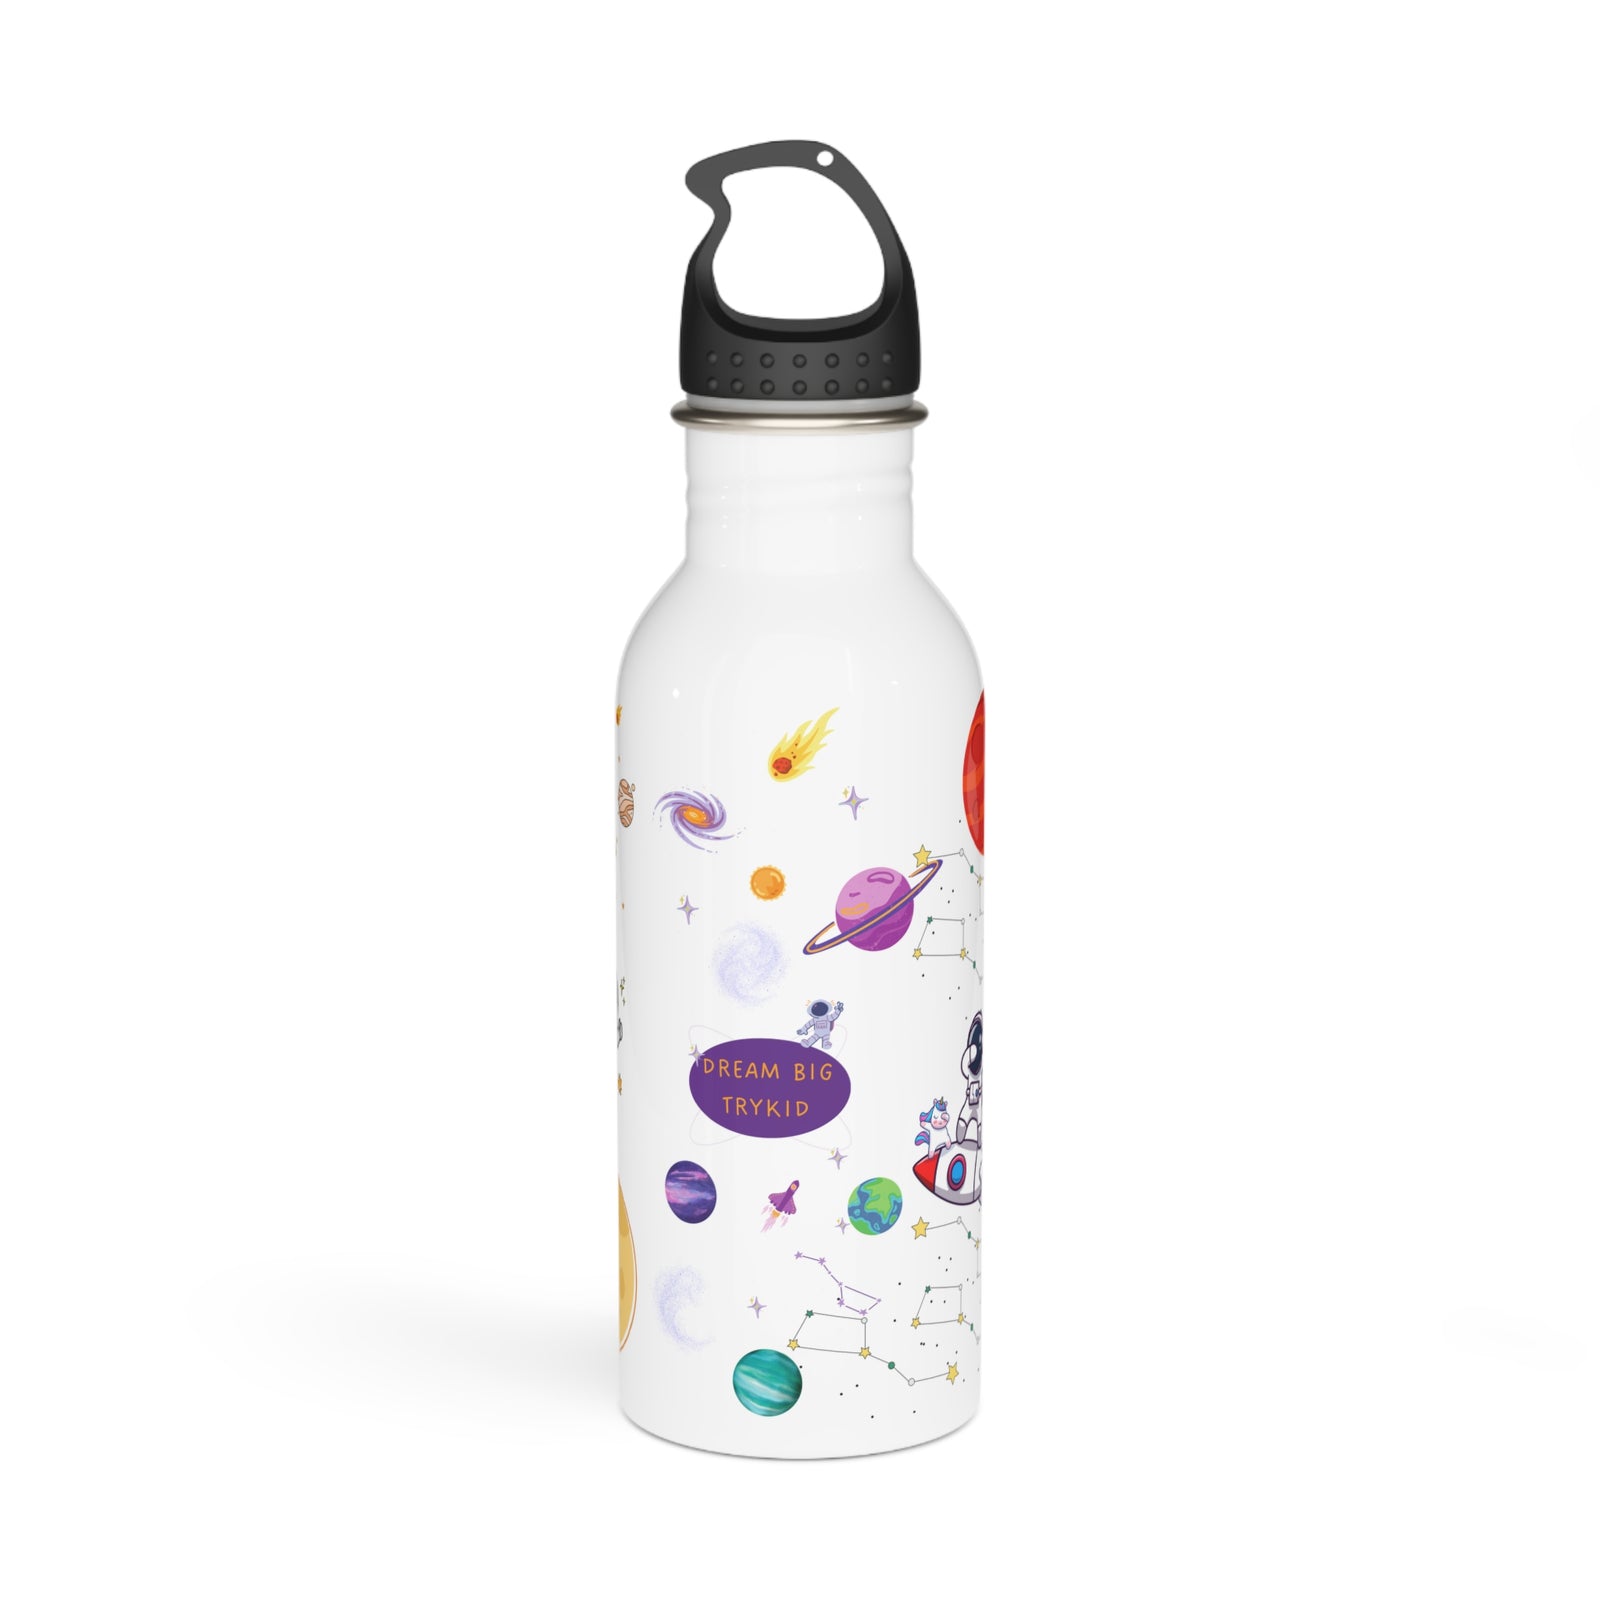 Galactic Adventure Stainless Steel Water Bottle - Fun Astronaut and Rocket Ship Design for Kids and Parents - Trendy and Cool Hydration by TryKid